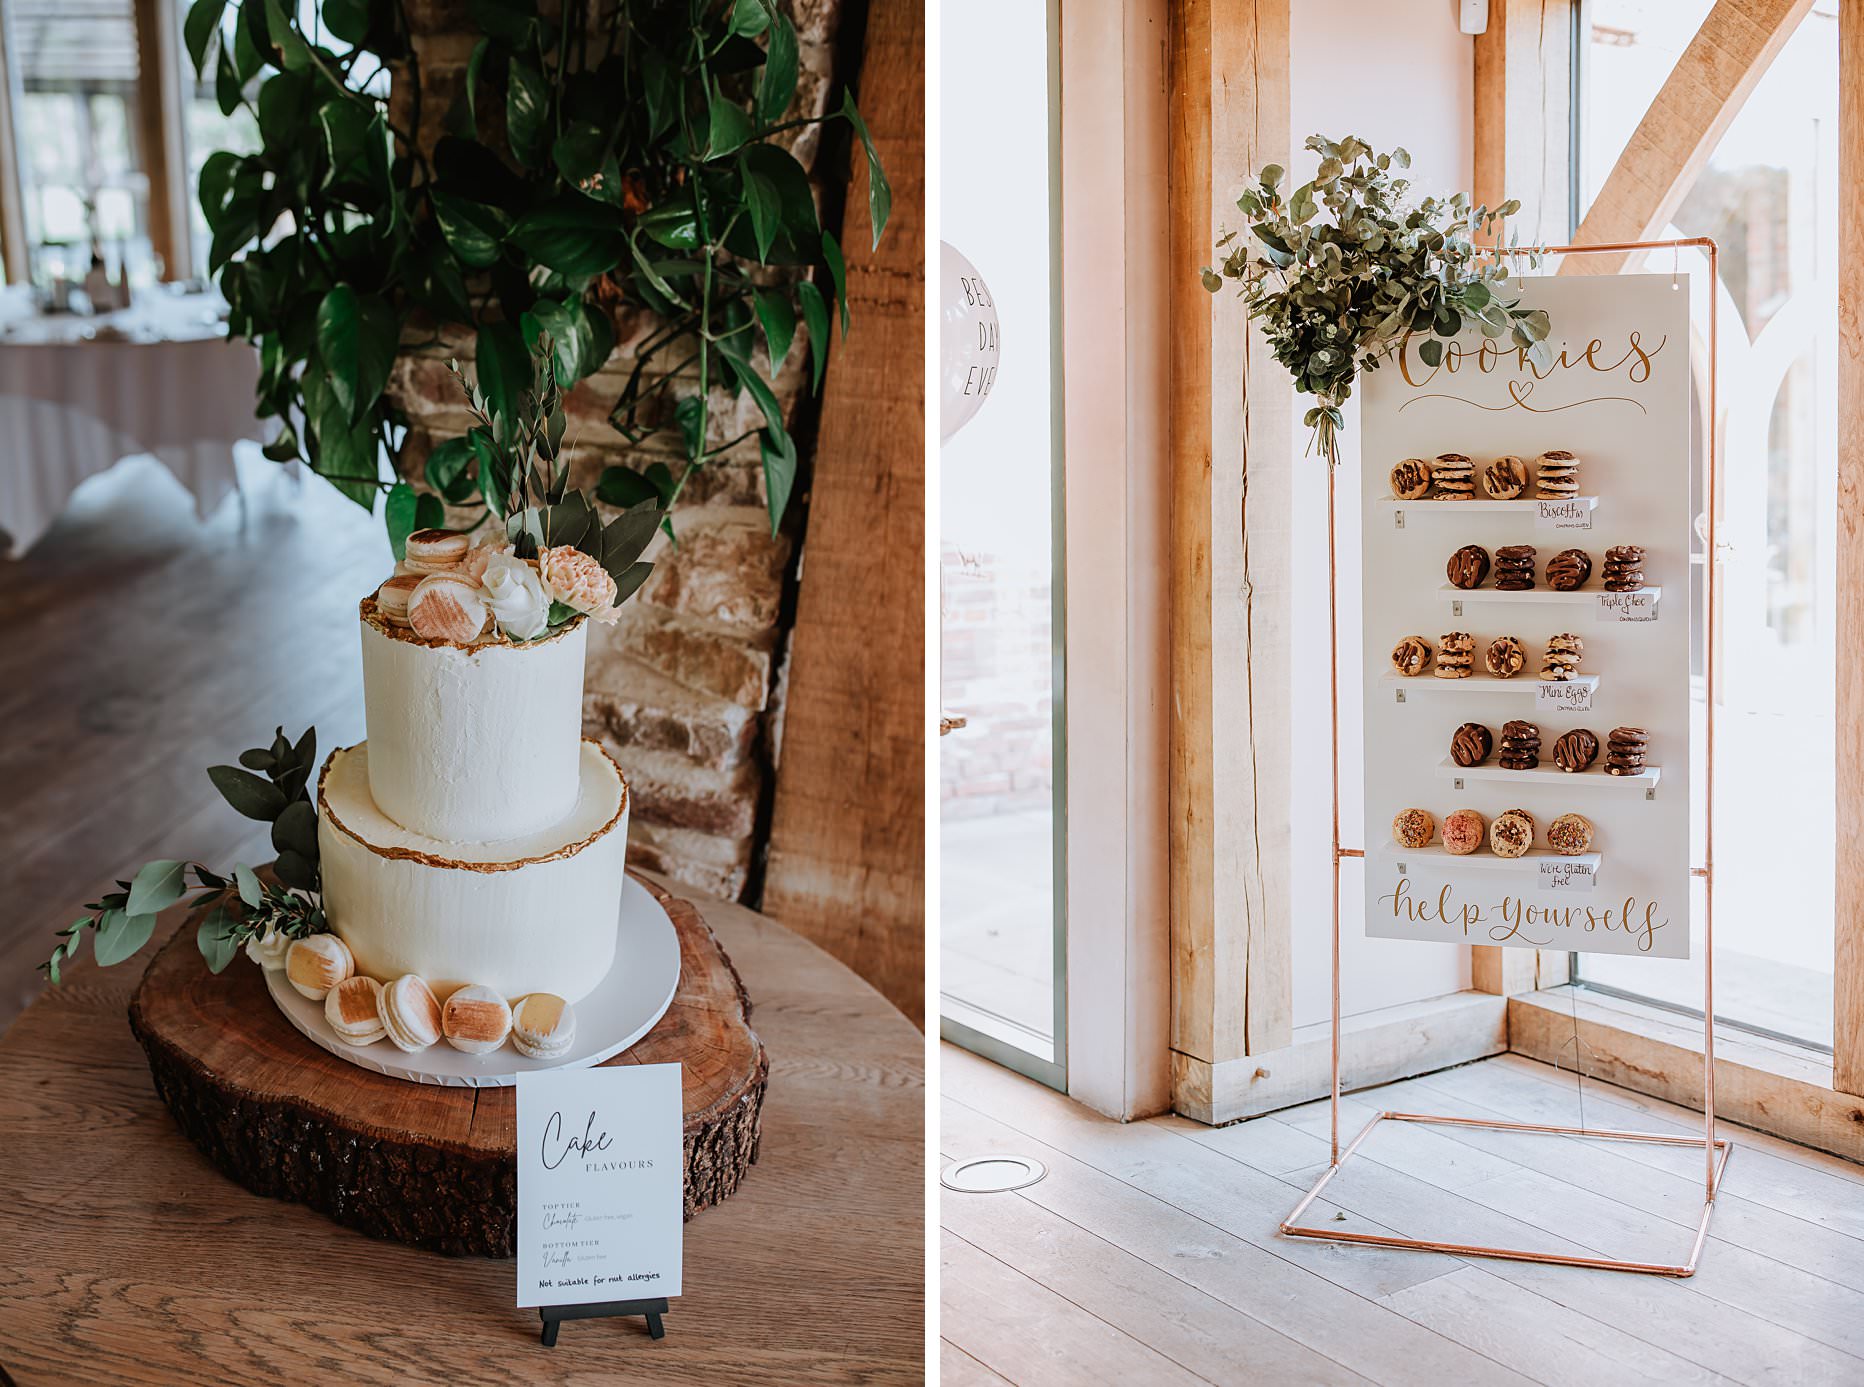 First image is of a small wedding cake made of two tiers. It is white and gold and decorated with macarons. Second image is of a donut station for wedding guests. It is a copper frame decorated with different flavours of donuts.